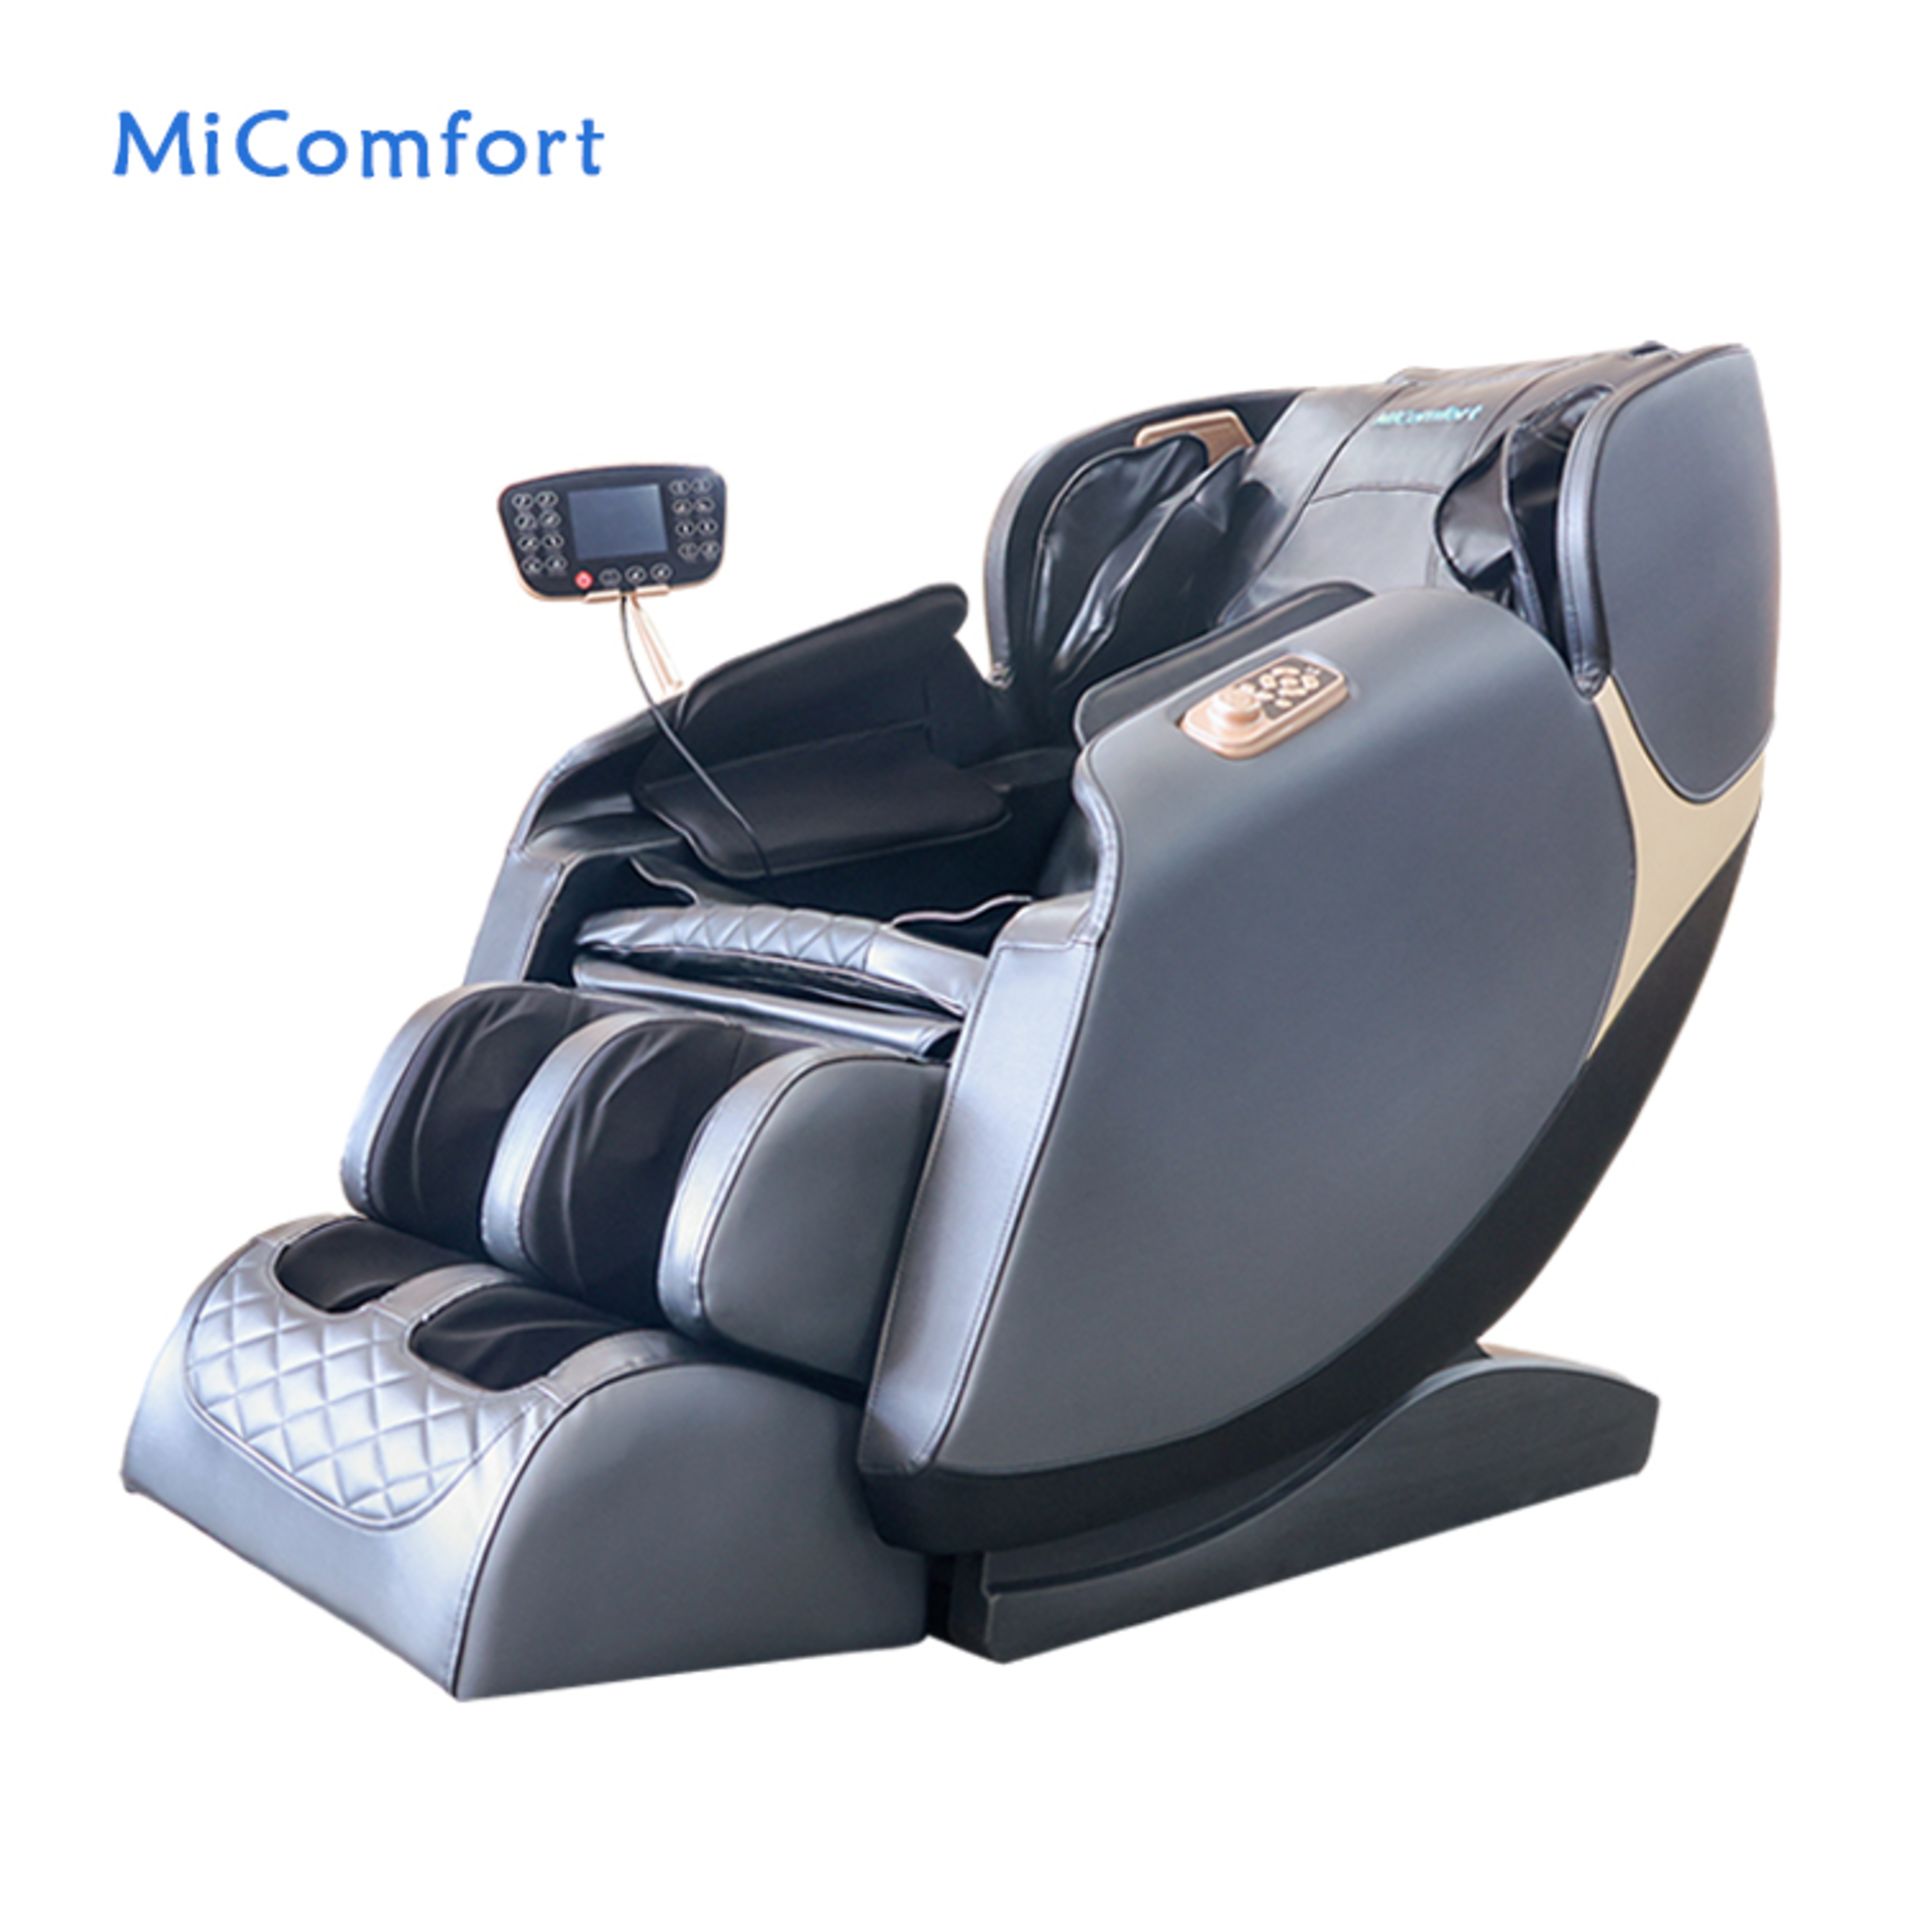 Brand New in Box Orchid MiComfort Full Body Massage Chair *NO VAT* - Image 2 of 13